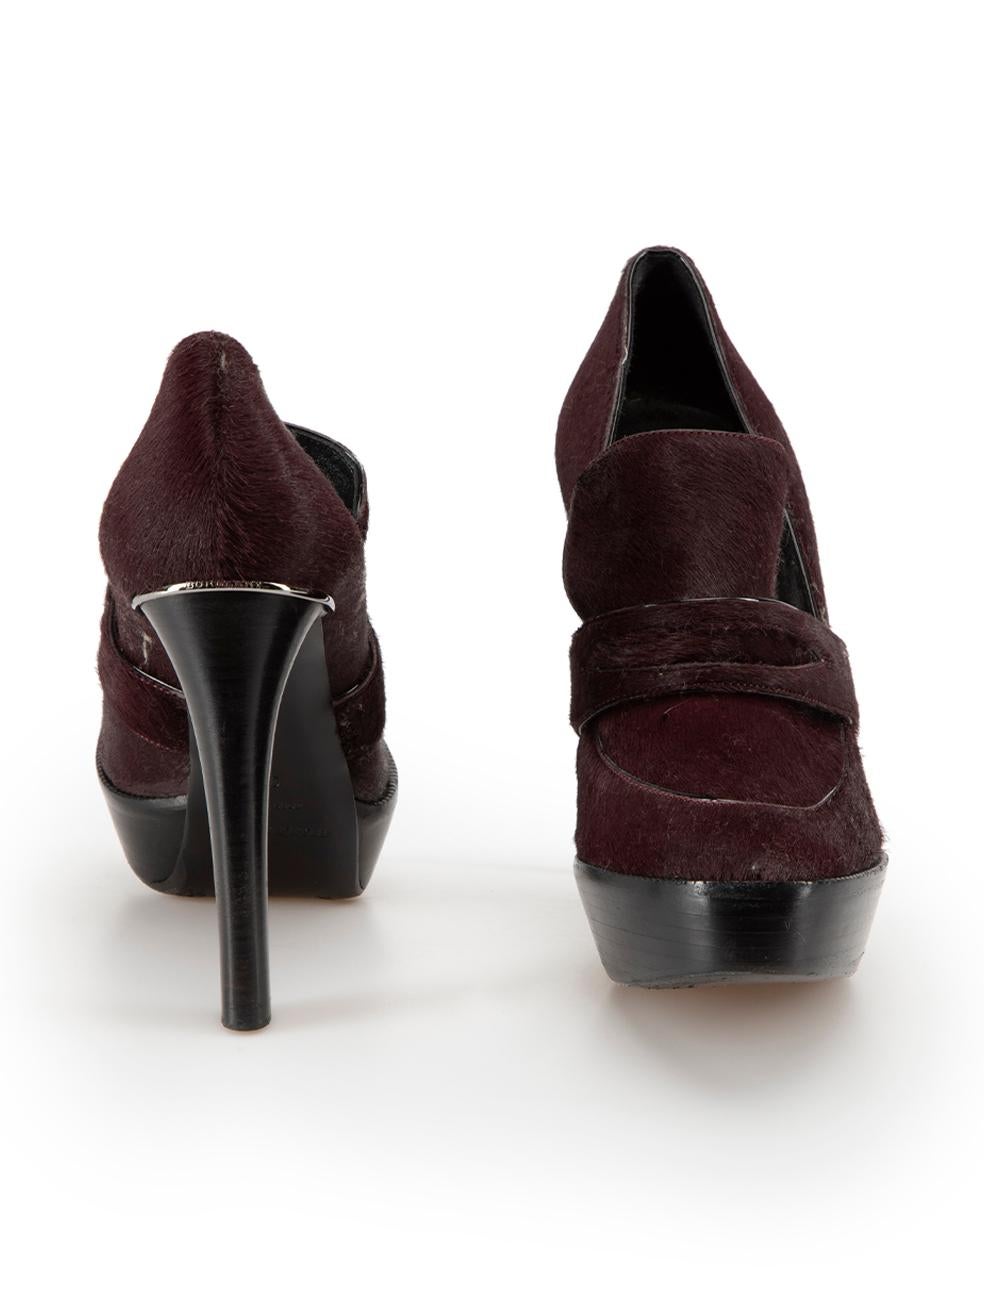 Burgundy Pony Hair Platform Pumps Size IT 36 In Good Condition For Sale In London, GB